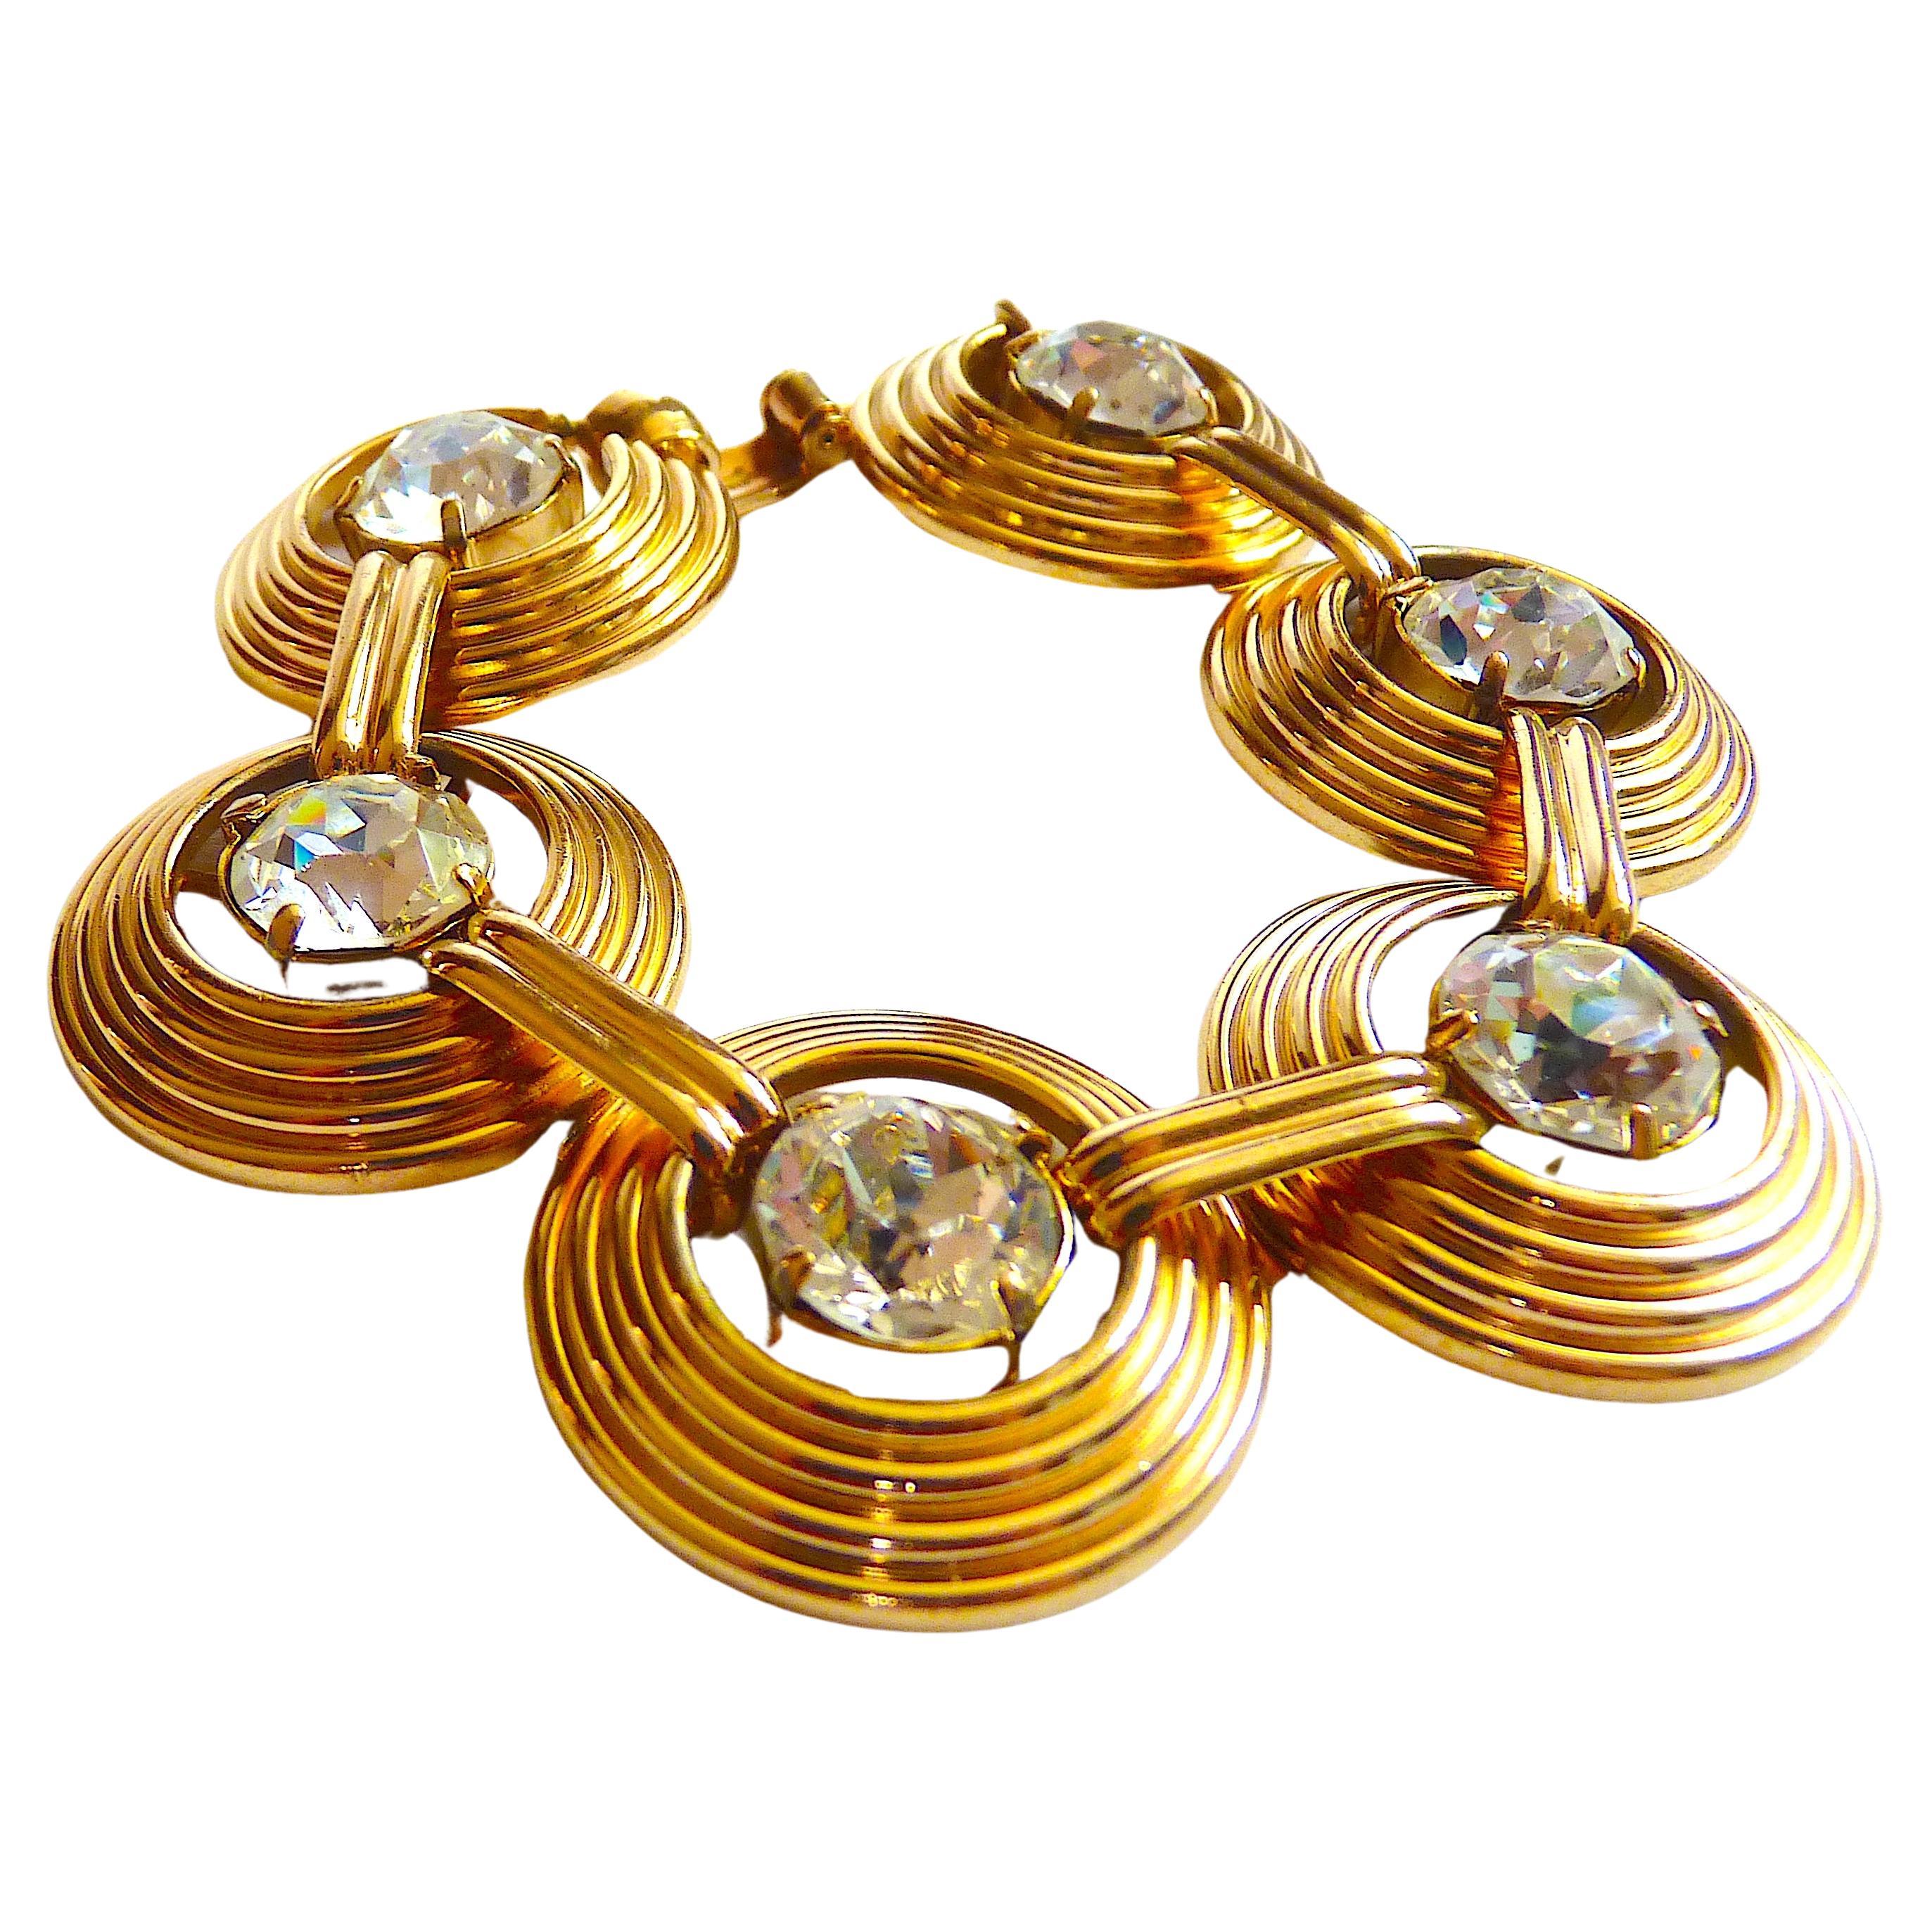 Dior Clear Crystal Cabochons and Gilt Metal Bracelet, Vintage from the 1970s